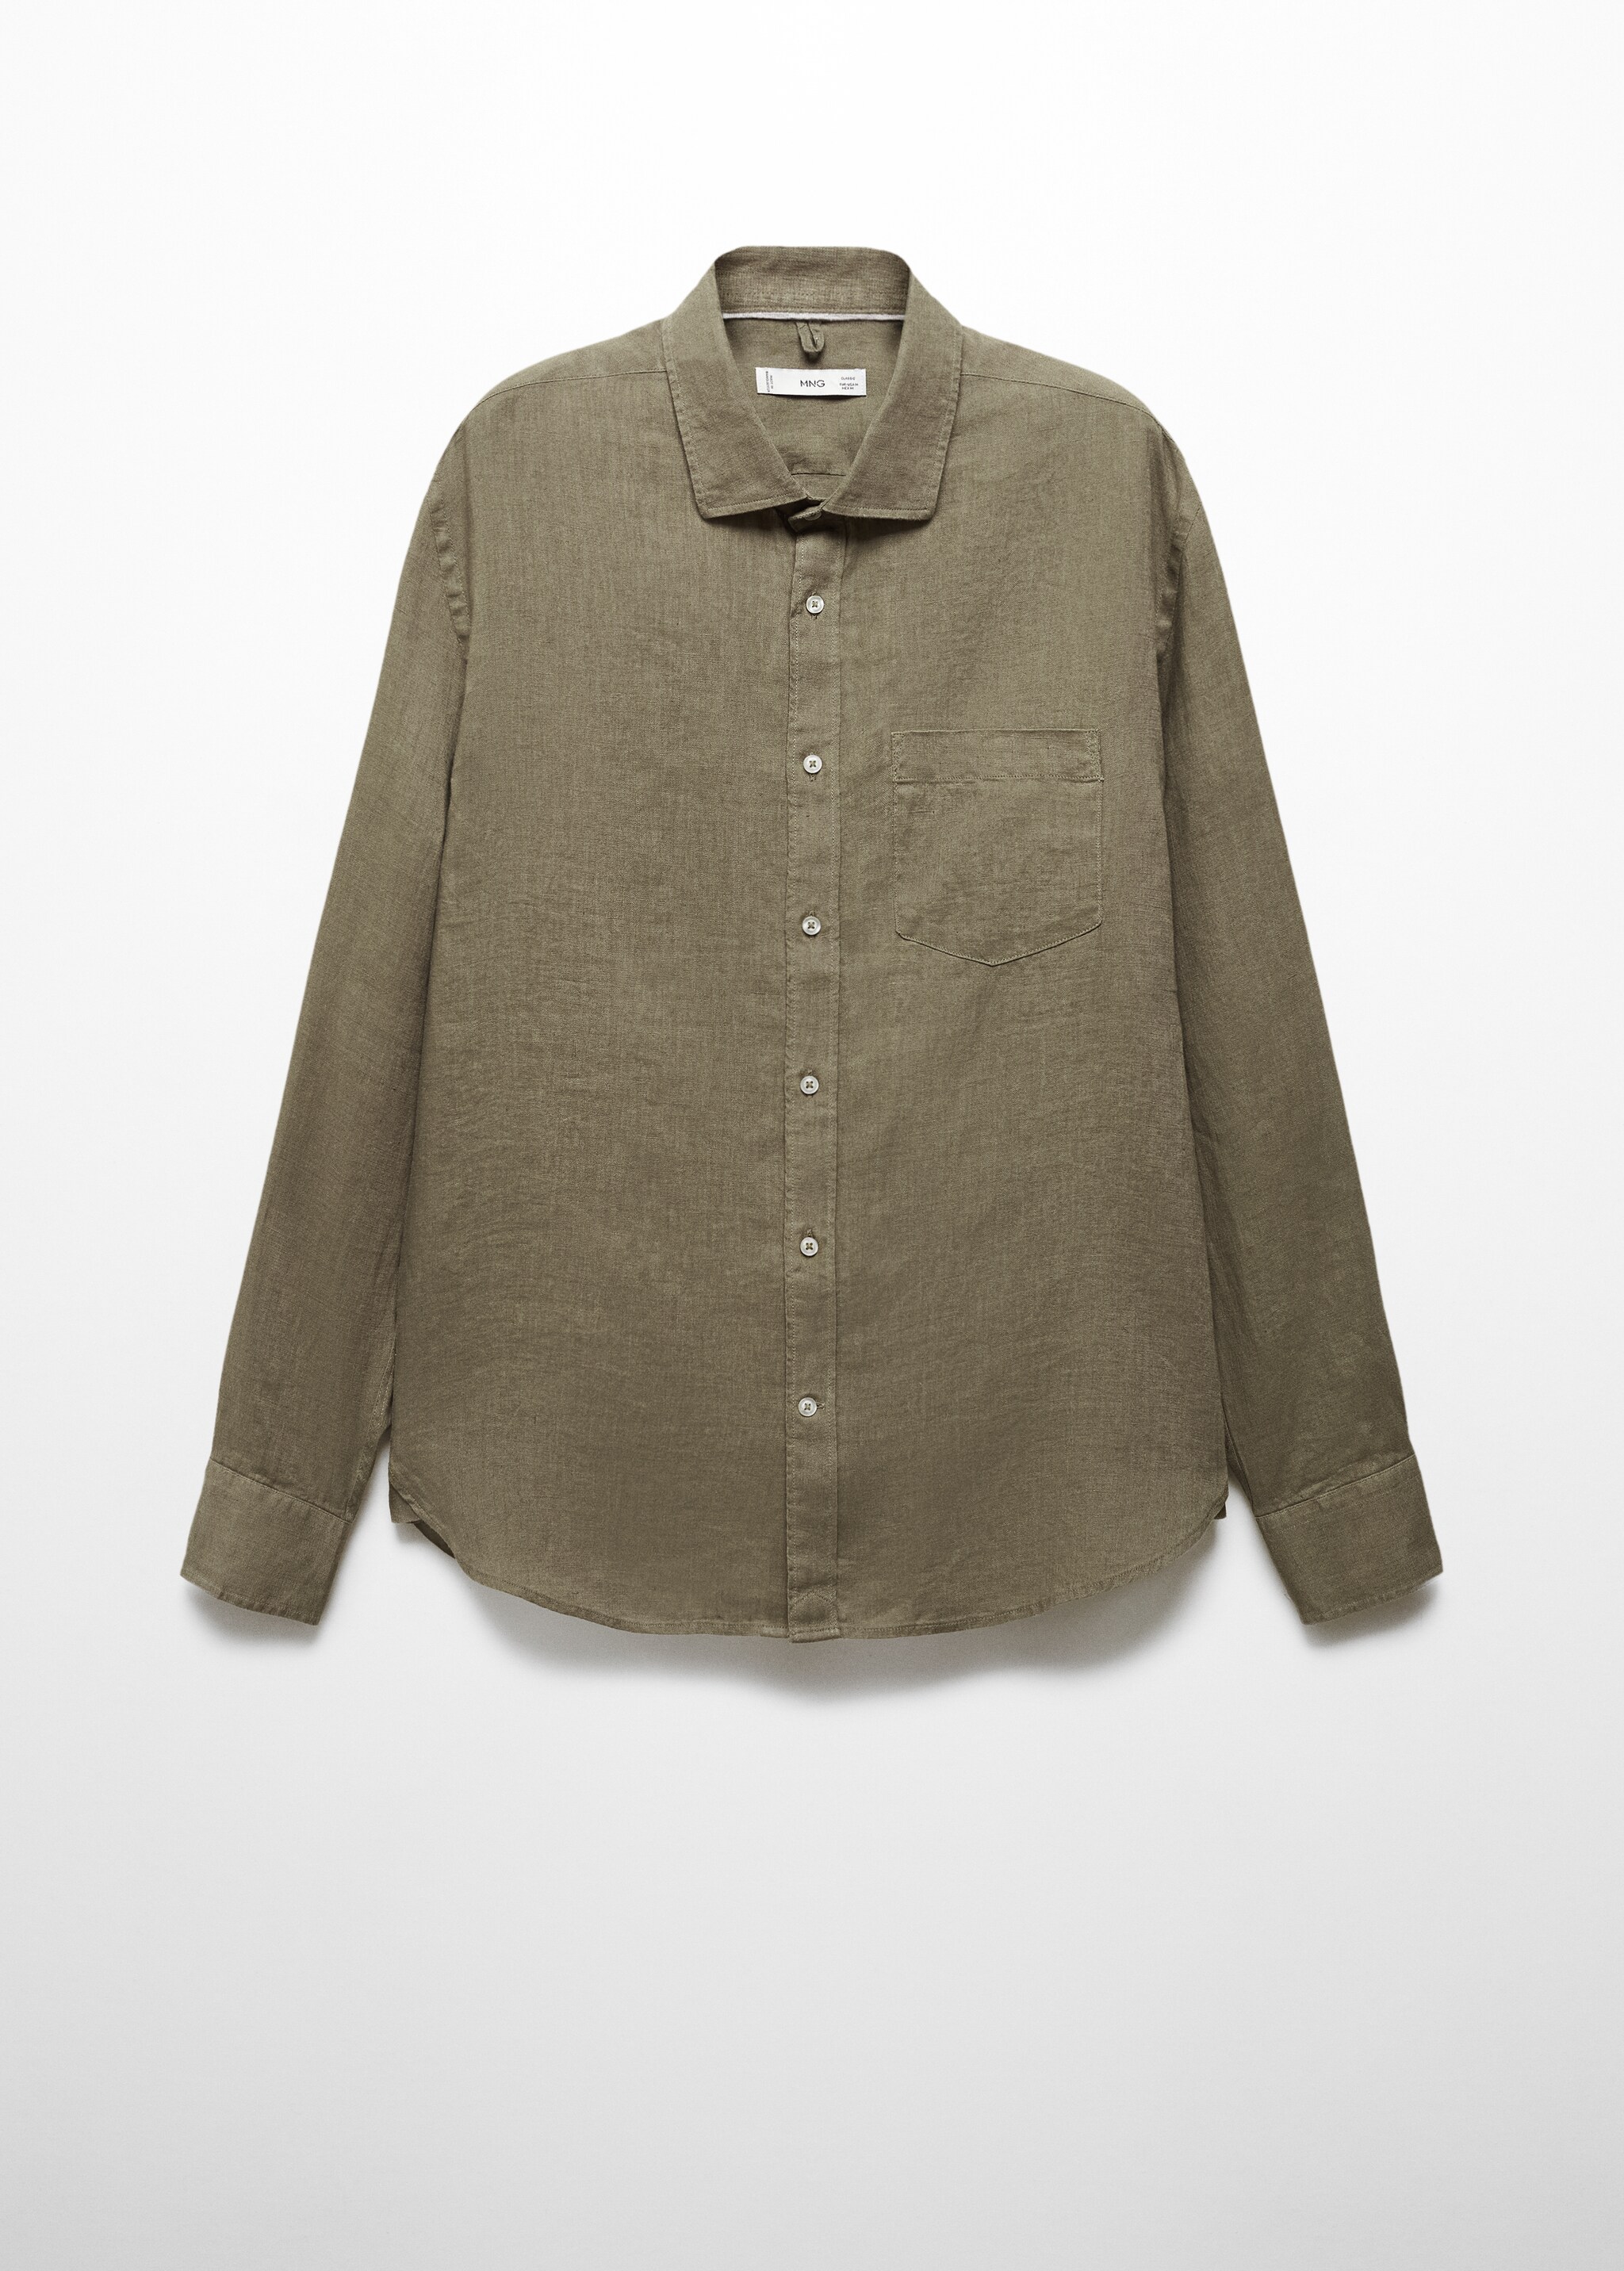 Classic fit 100% linen shirt - Article without model